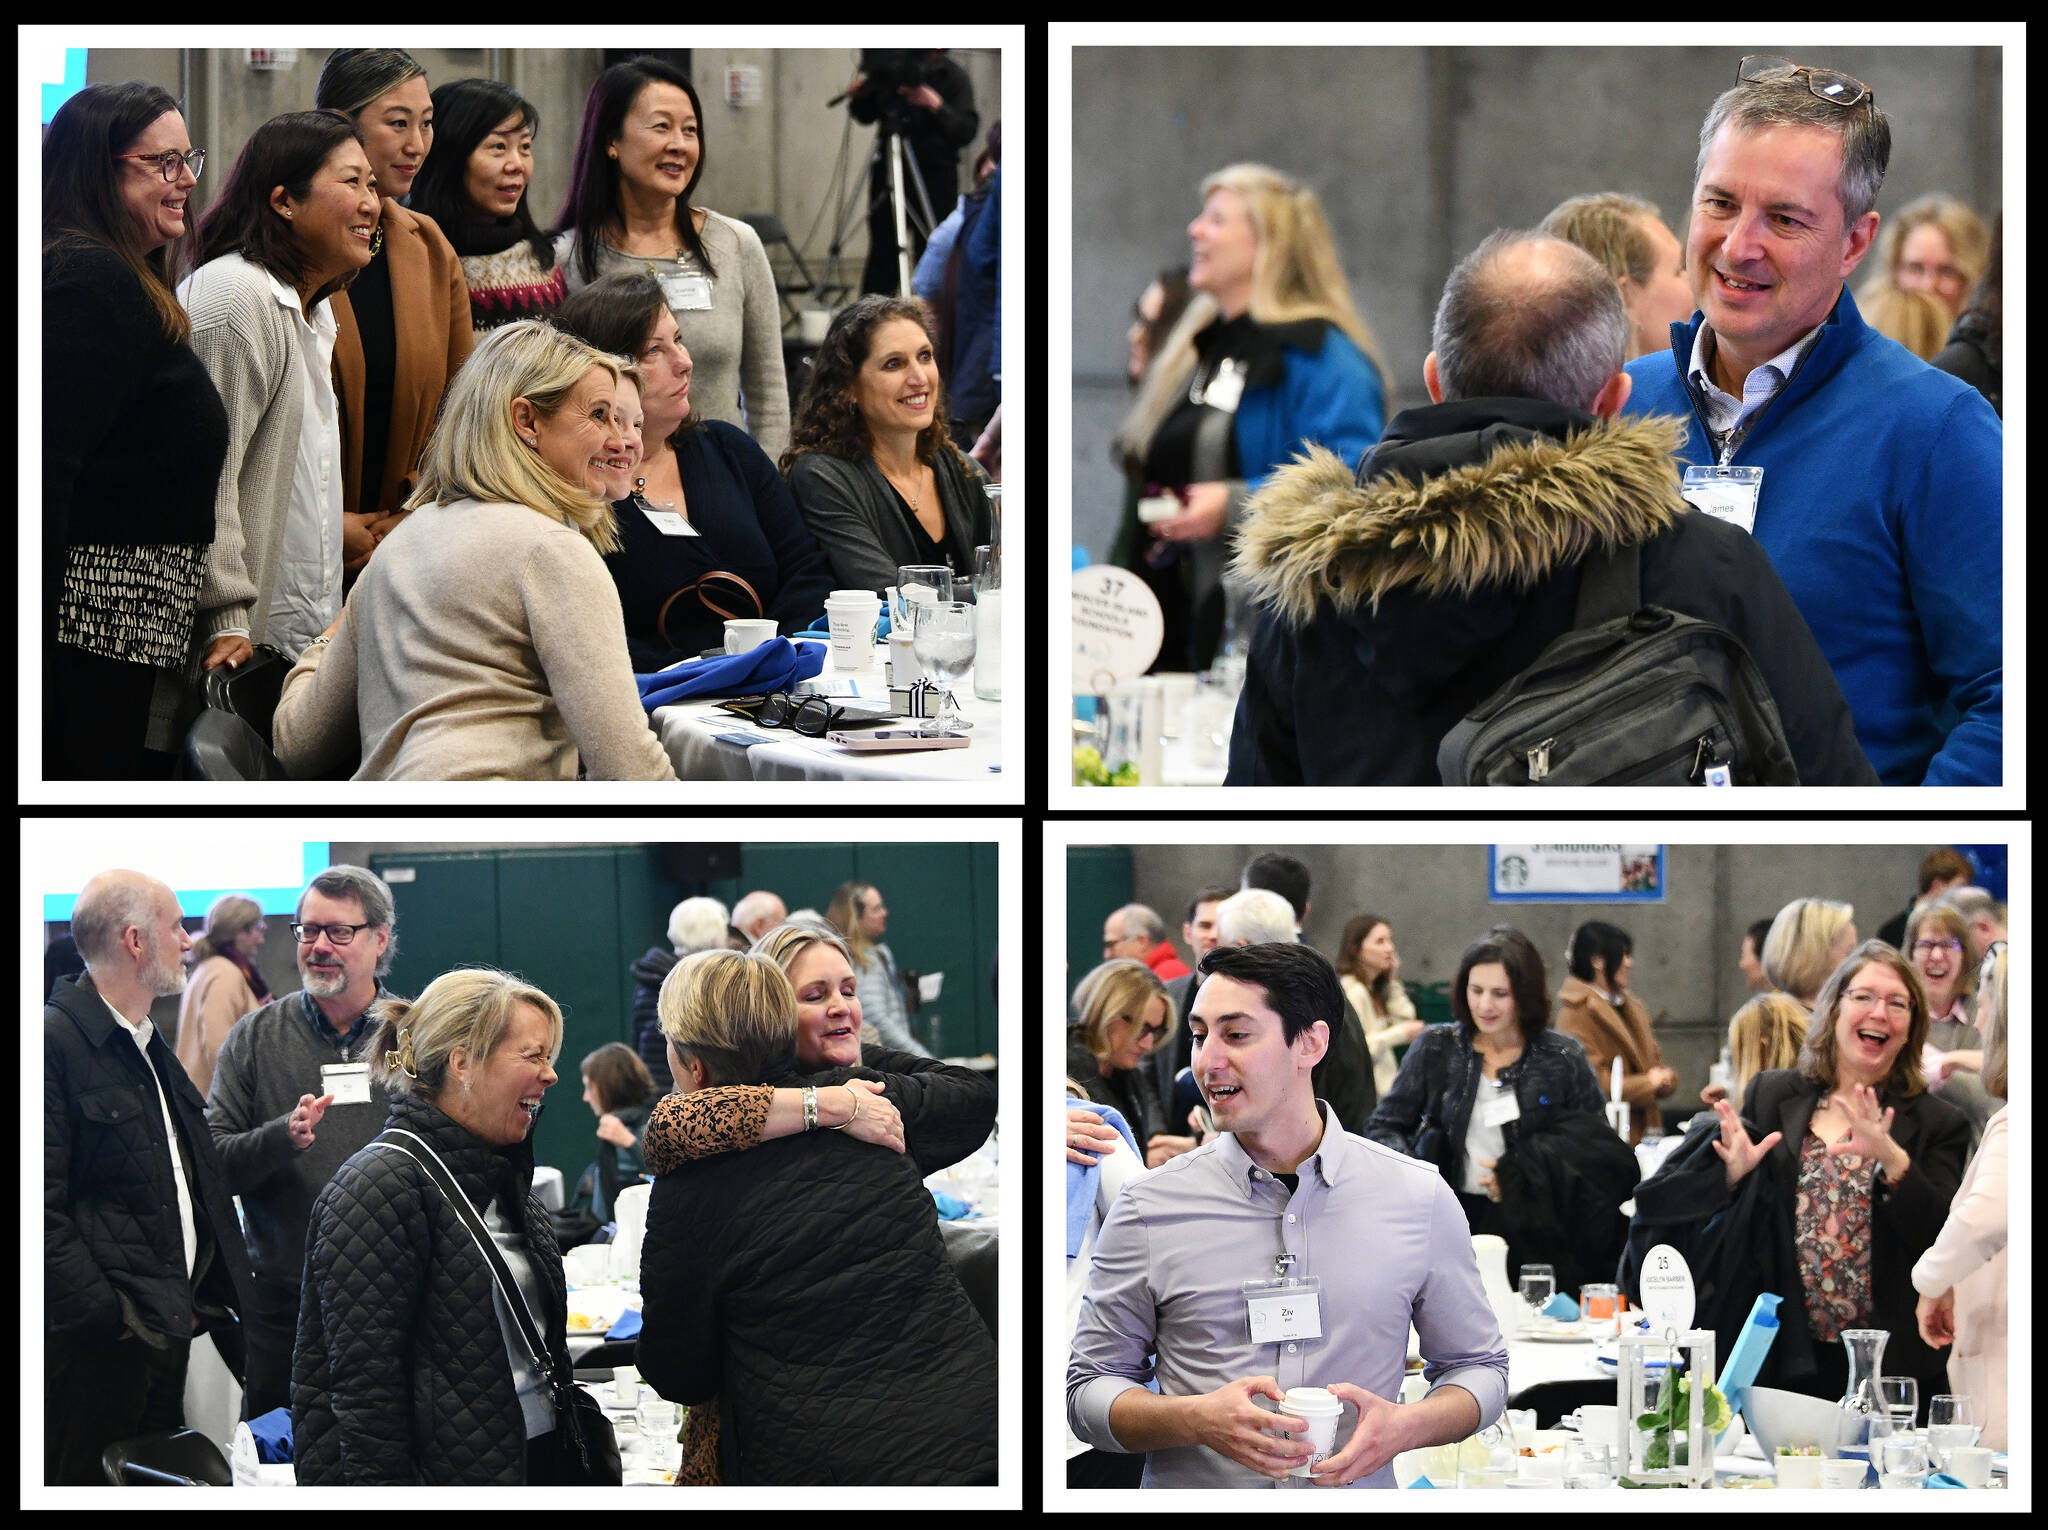 Attendees get in some visiting time following the 22nd annual Mercer Island Youth and Family Services Foundation fundraising breakfast on Feb. 7 at the Mercer Island Community and Event Center. Andy Nystrom/ staff photos